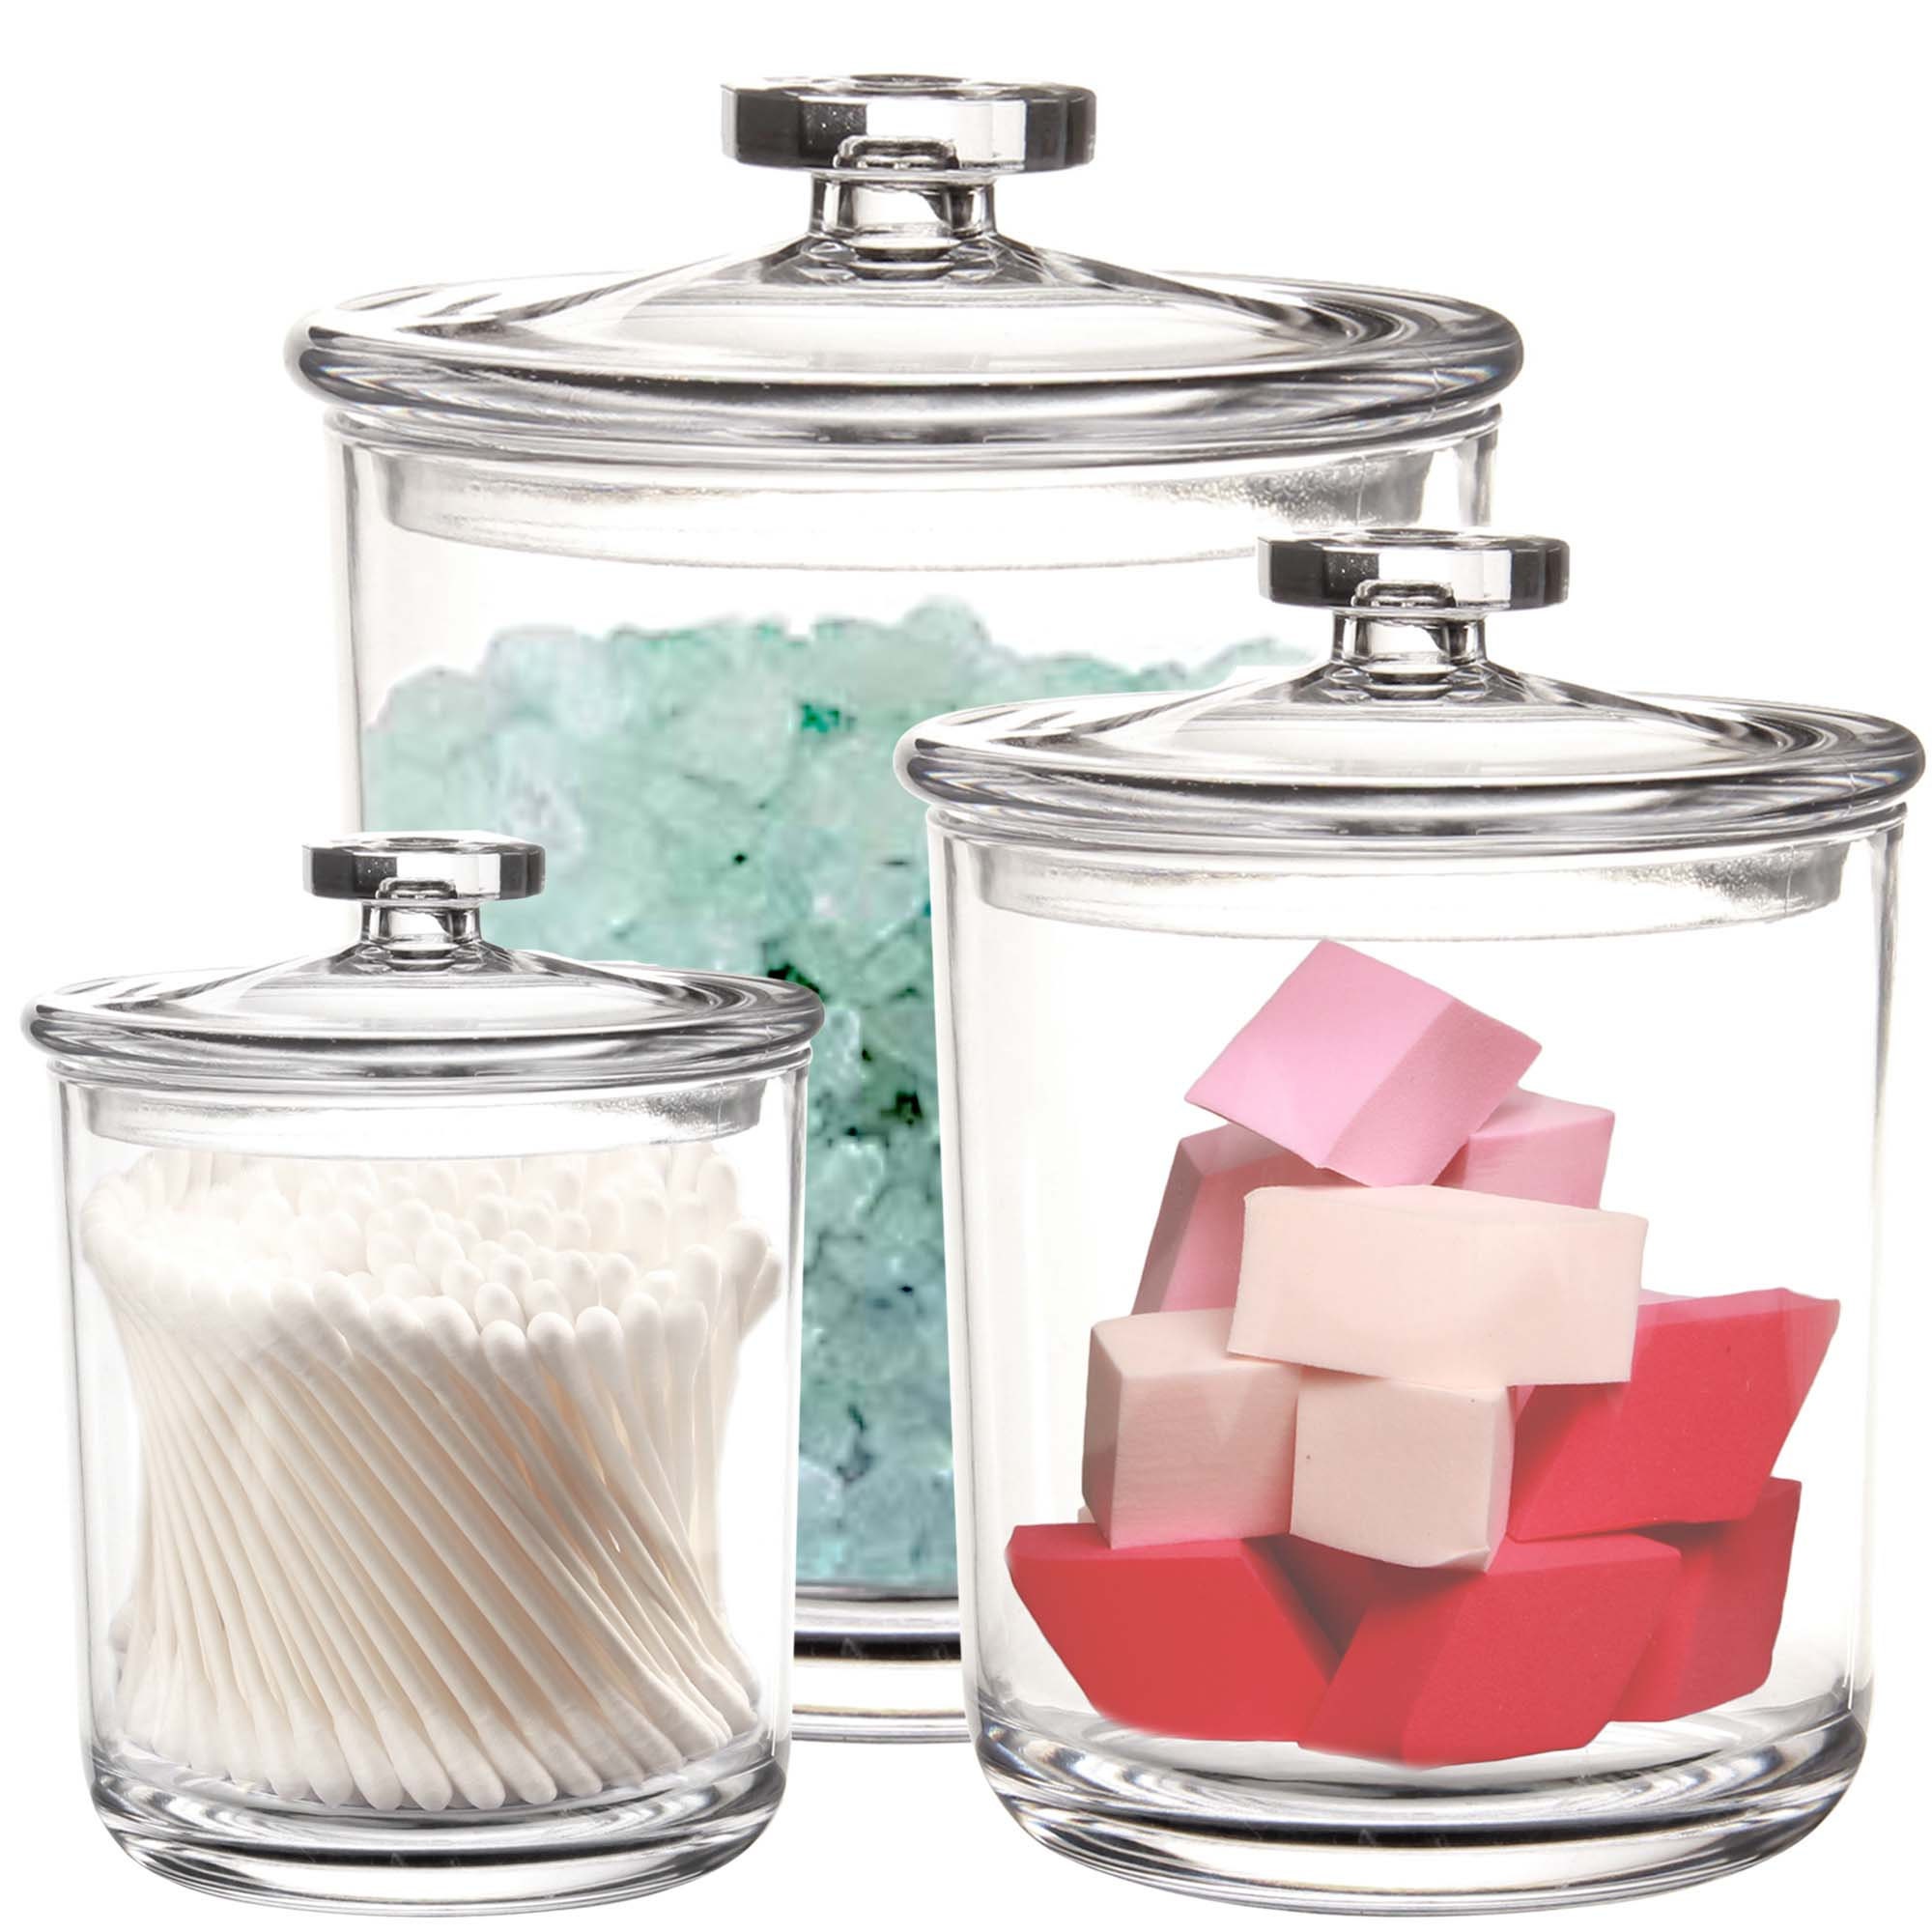 3 Pack Glass Apothecary Jar, Candy Jars With Lids, Glass Jars for Display  Storage, Display Decor, Home Decor 10/14/16 